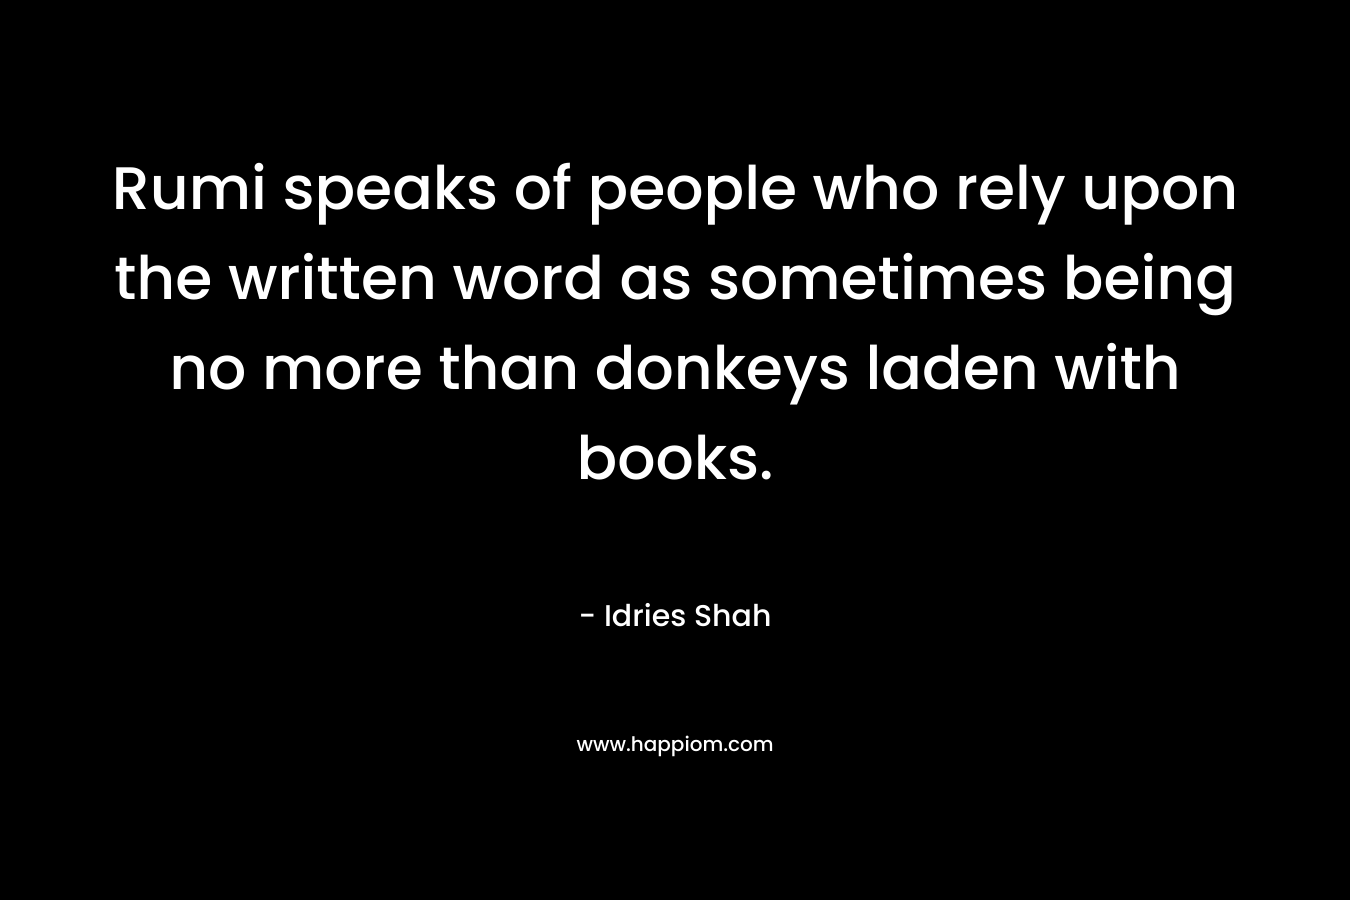 Rumi speaks of people who rely upon the written word as sometimes being no more than donkeys laden with books. – Idries Shah